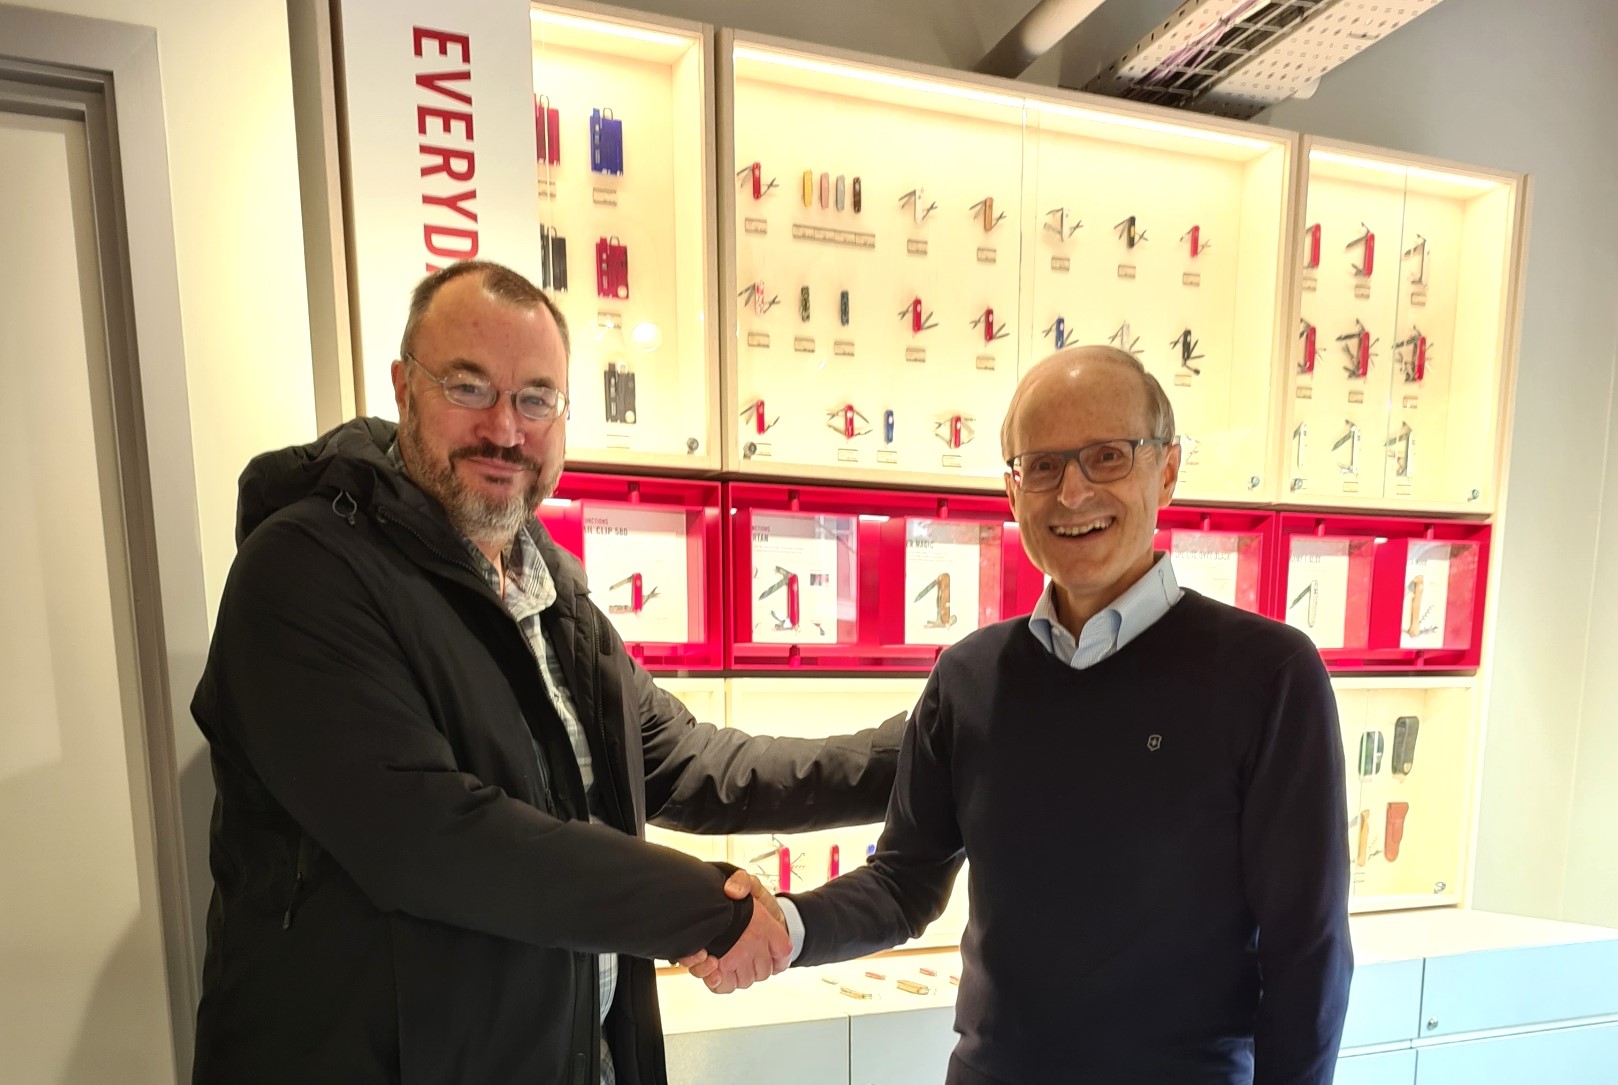 Three Points of the Compass congratulates Carl Elsener, CEO Victorinox, on the opening of their new Flagship Store in London's Oxford Street